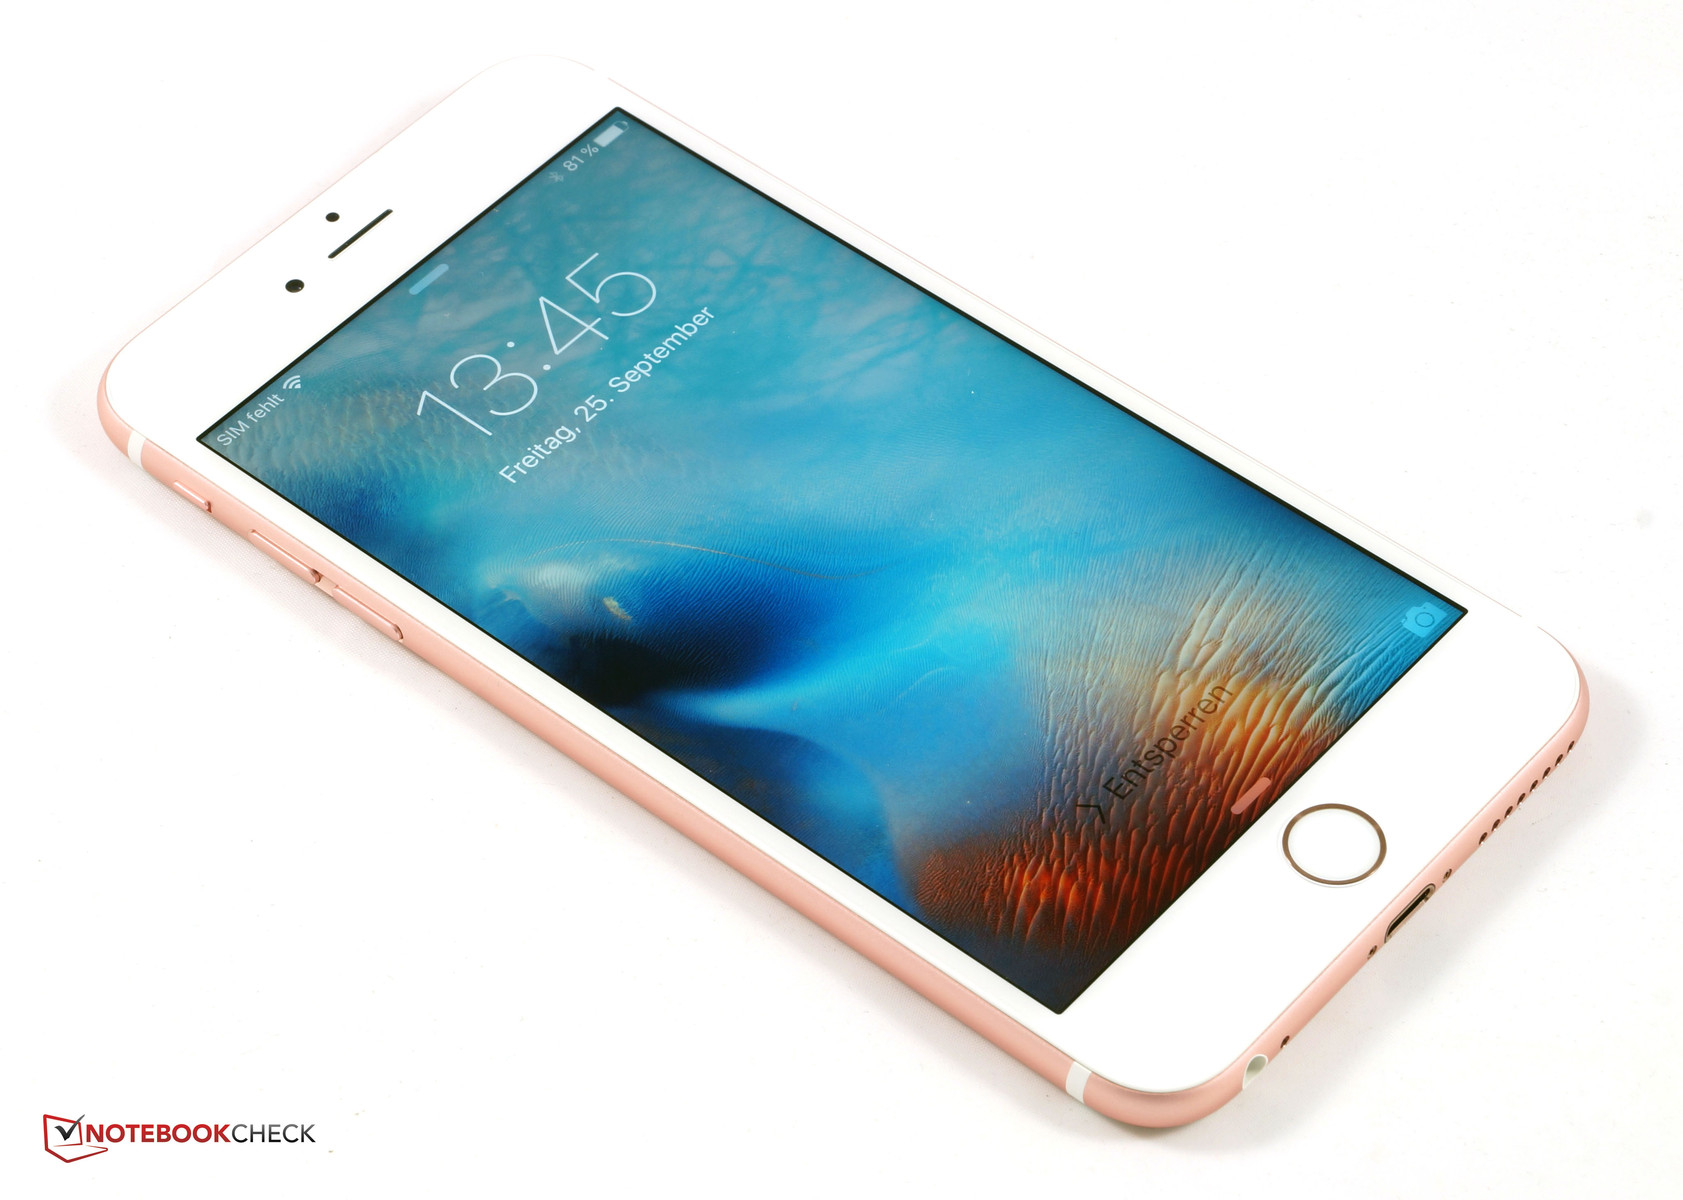 Apple iPhone 6S Smartphone - Reviews